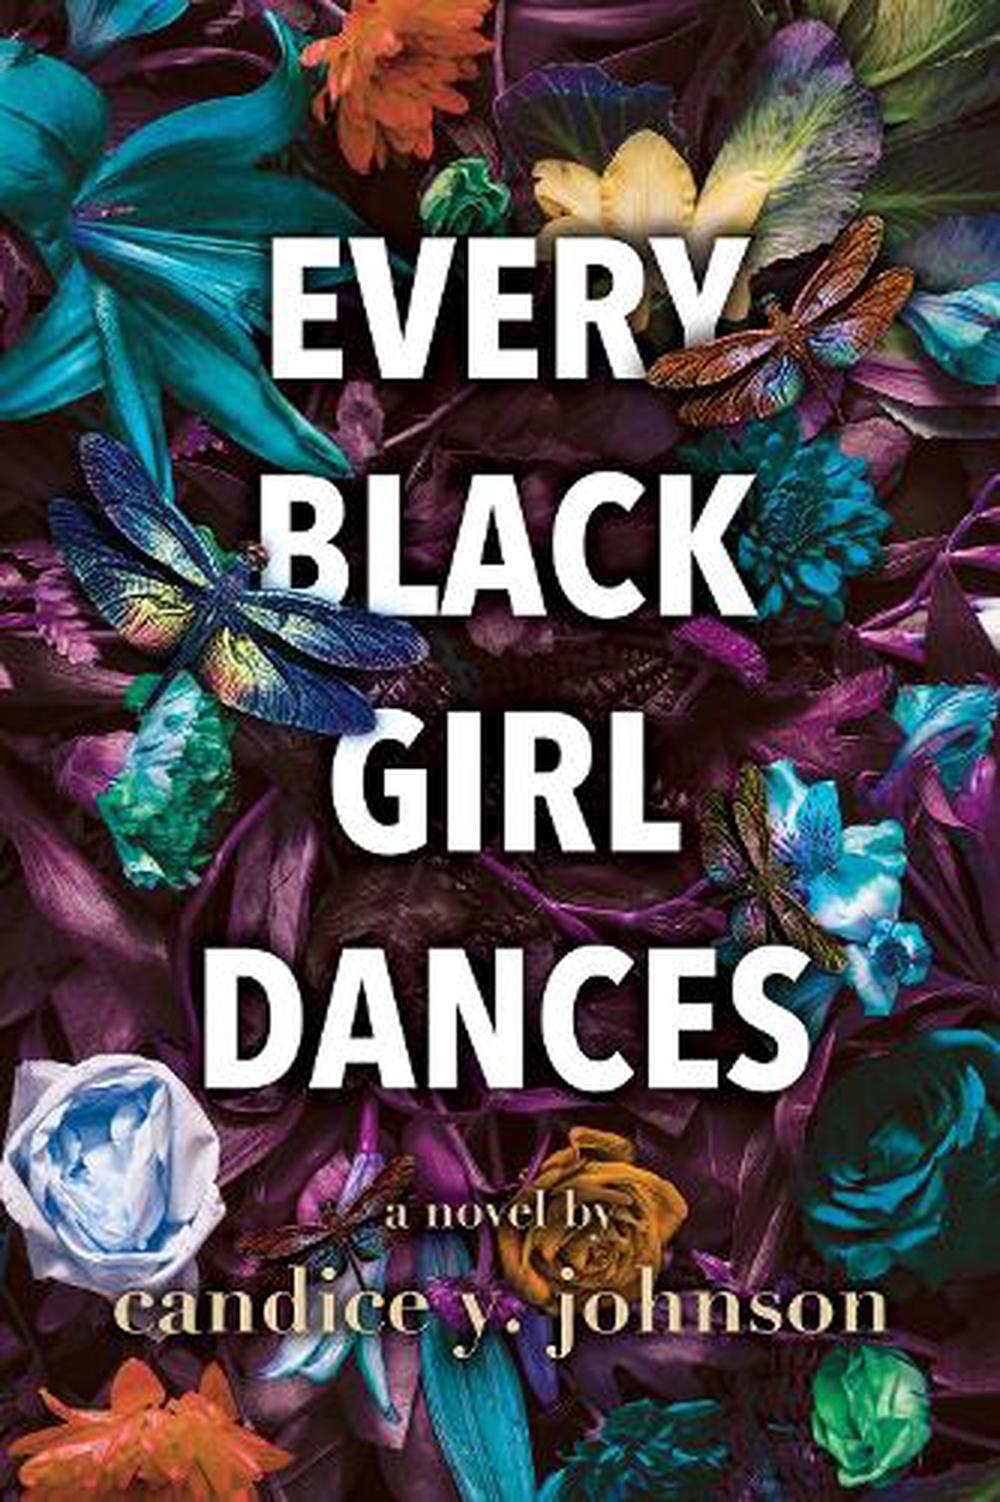 Every Black Girl Dances - by Candice y Johnson (Paperback)